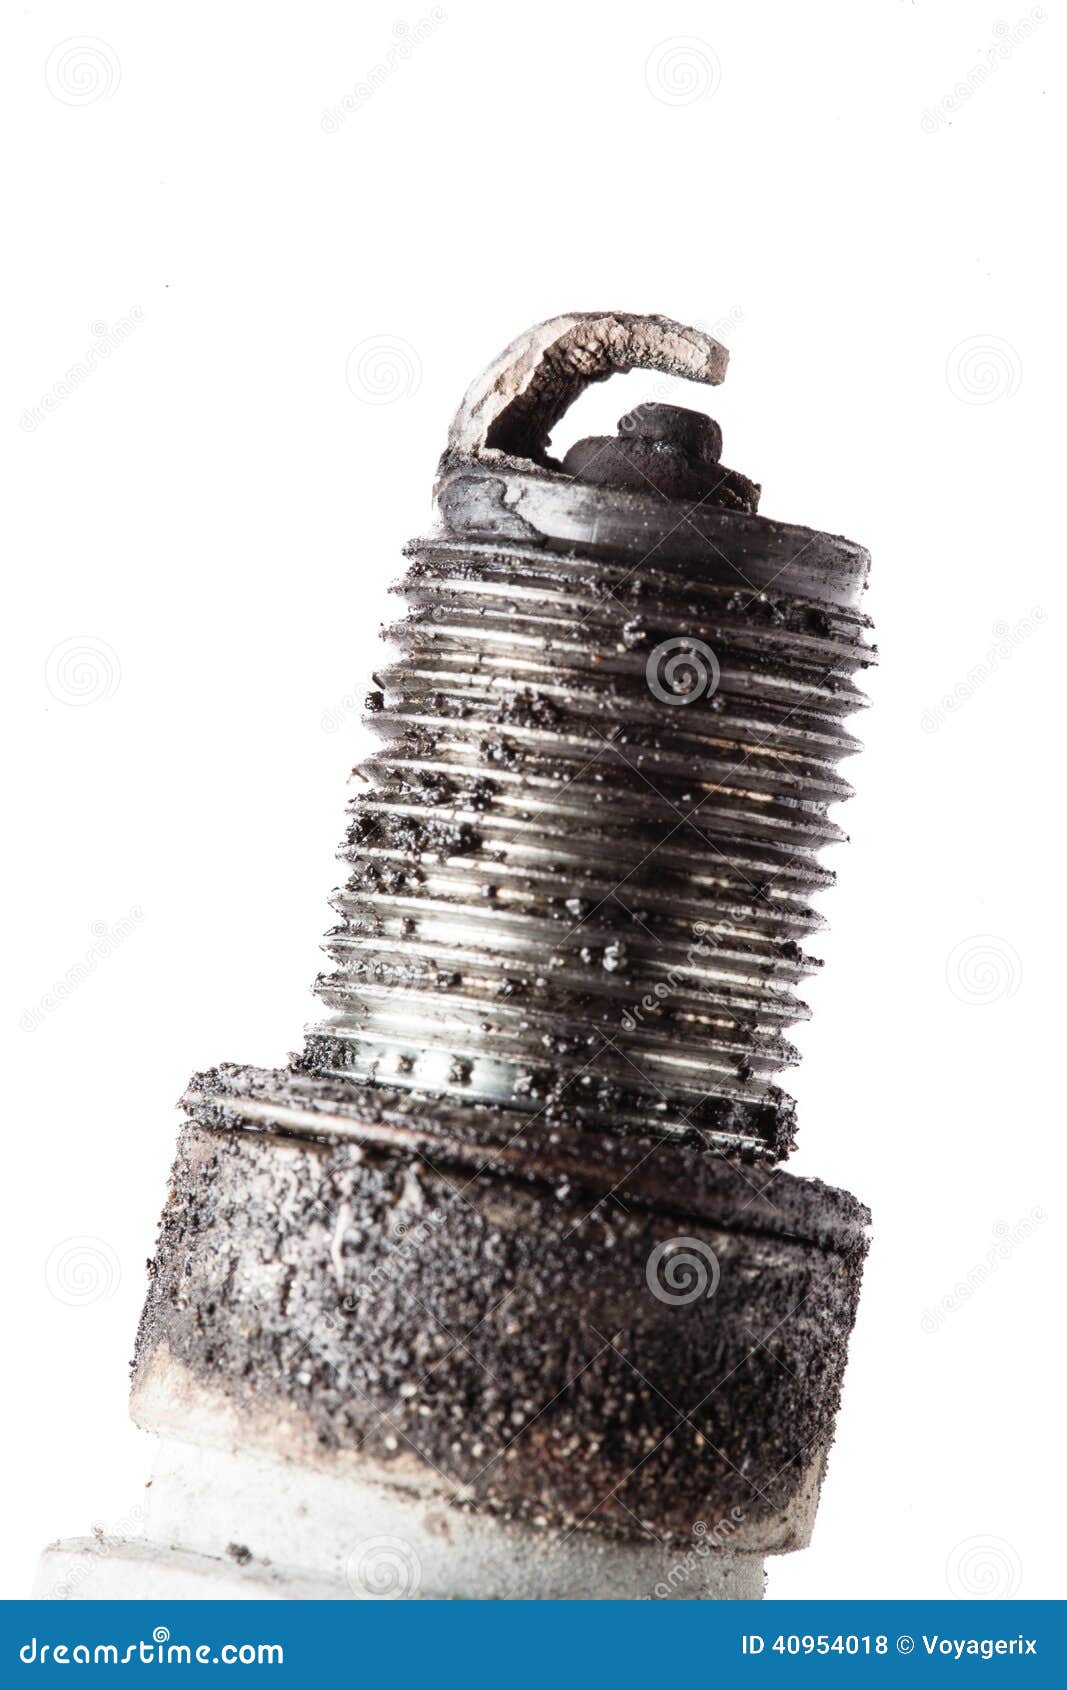 Auto Service. Old Spark Plug As Spare Part Of Car. Stock ...
